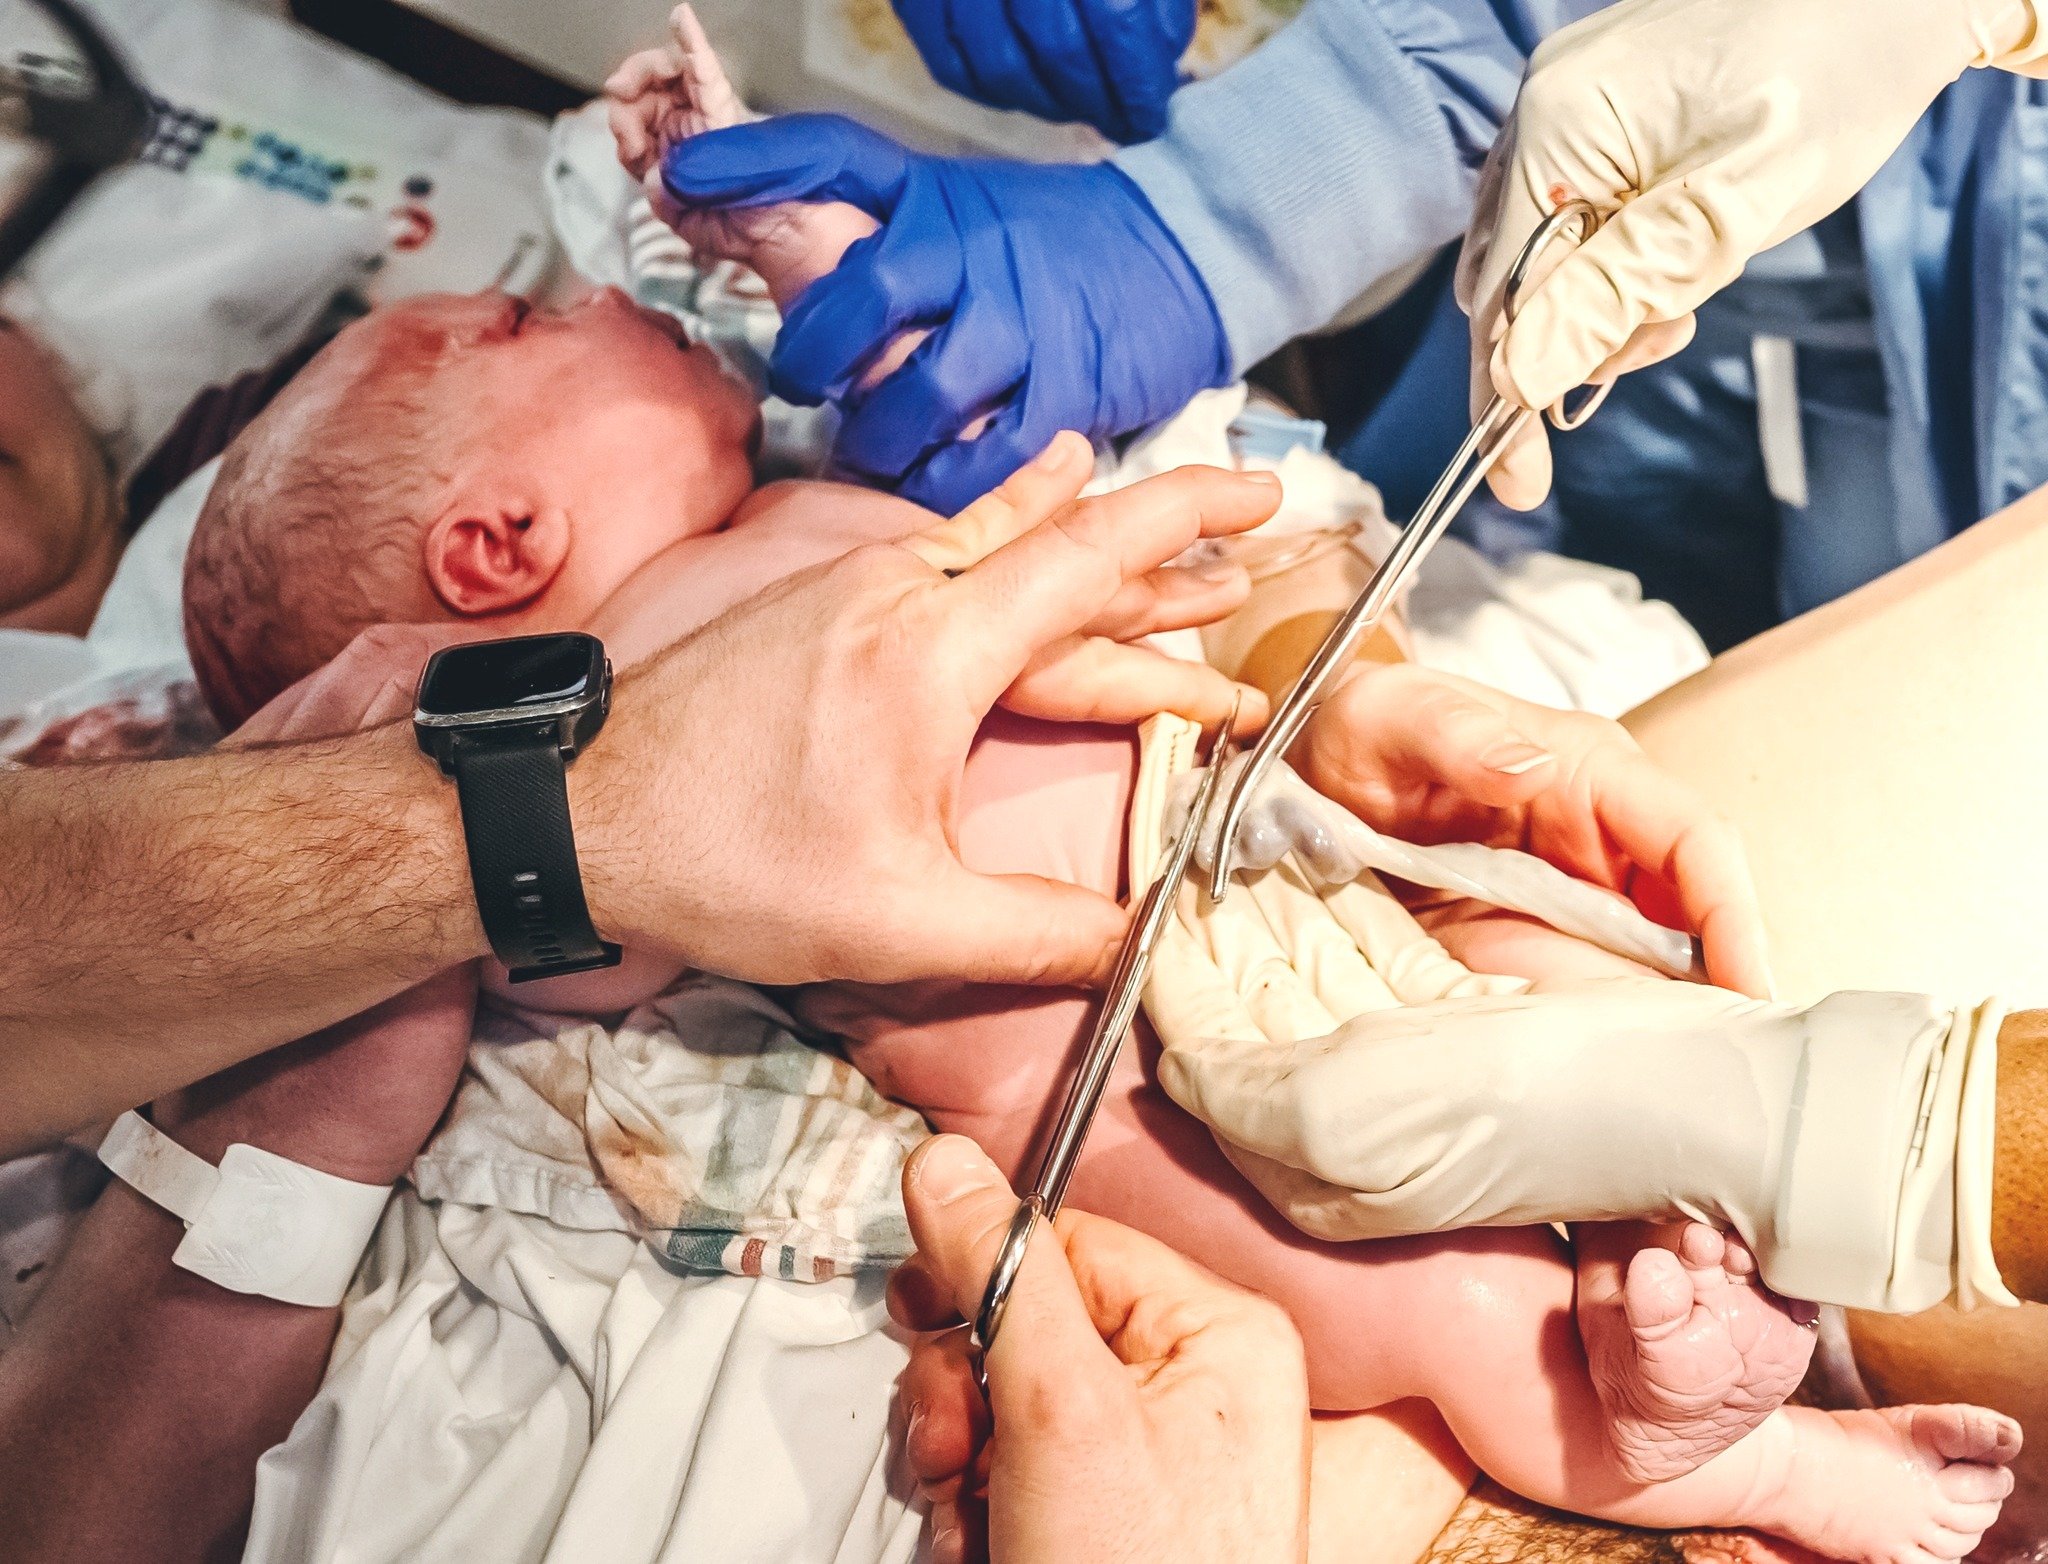 Cutting the cord! I love all of the hands in this image, supporting baby and mama as dad separates babe from placenta. His first home. 

#birth #birthstory #birthgrandrapids #birthphotographer #birthphotography #birthdoula #hospitalbirth #hospitalmid